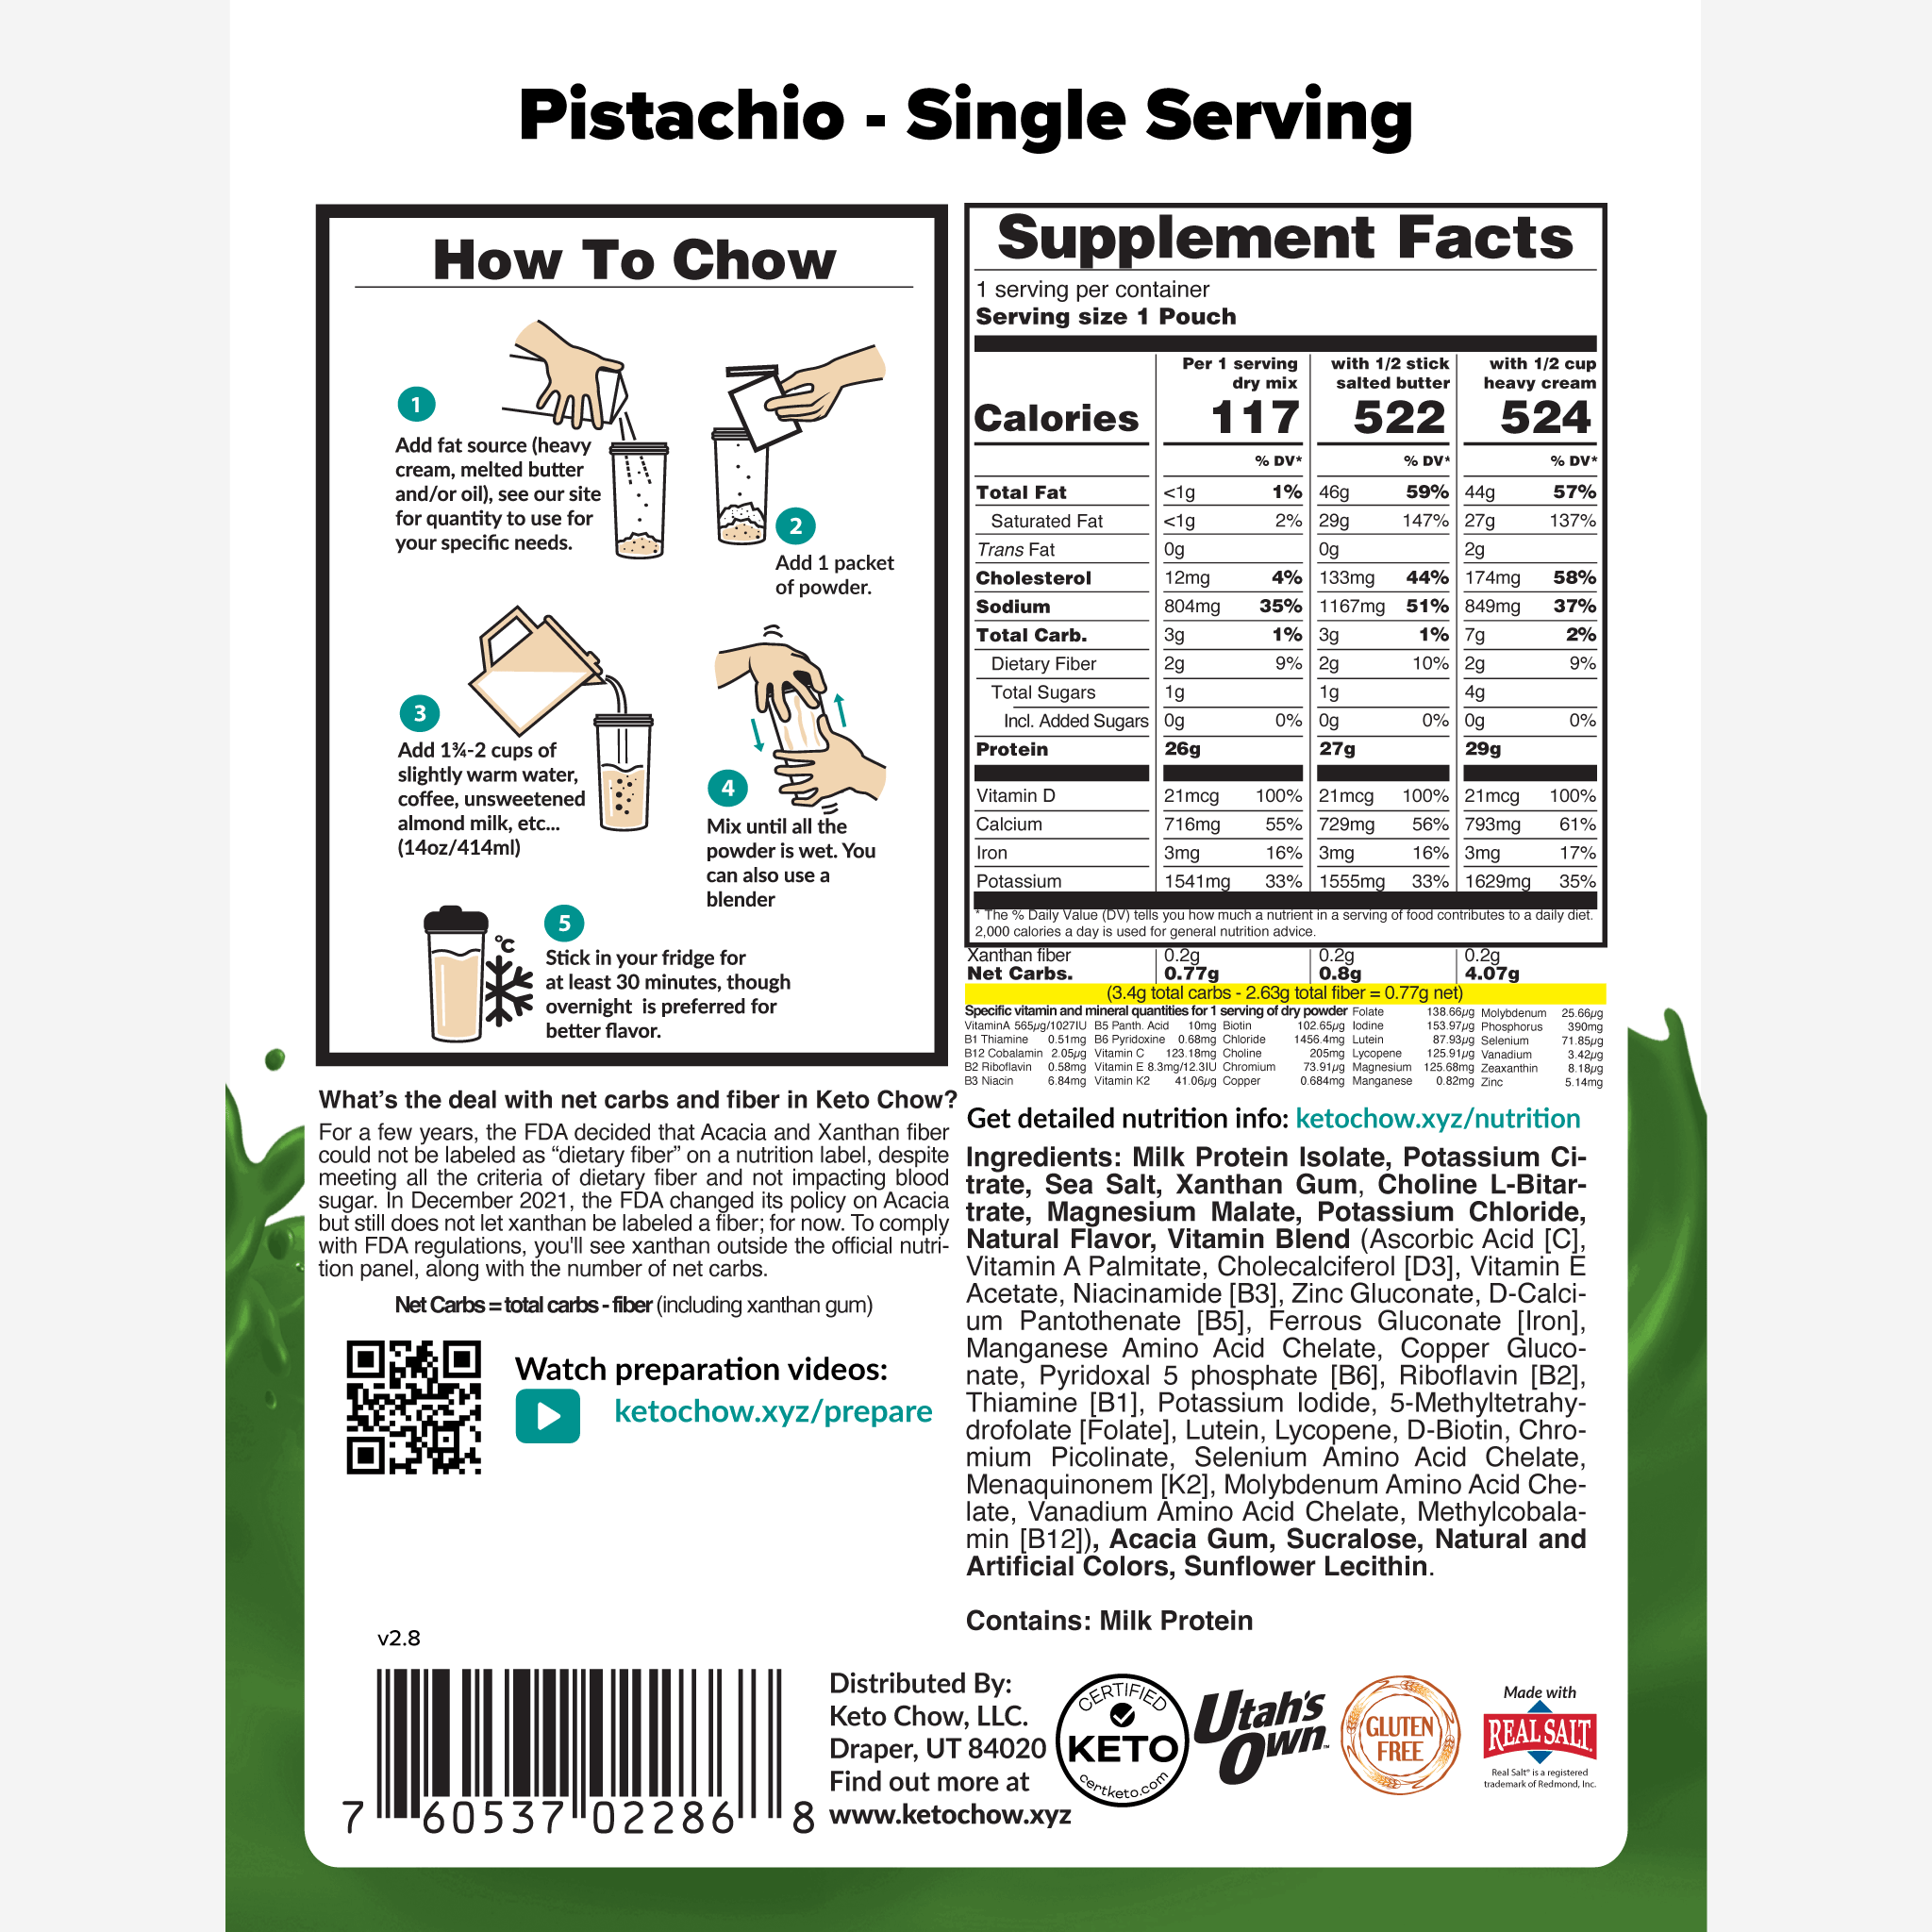 Pistachio Keto Chow package back